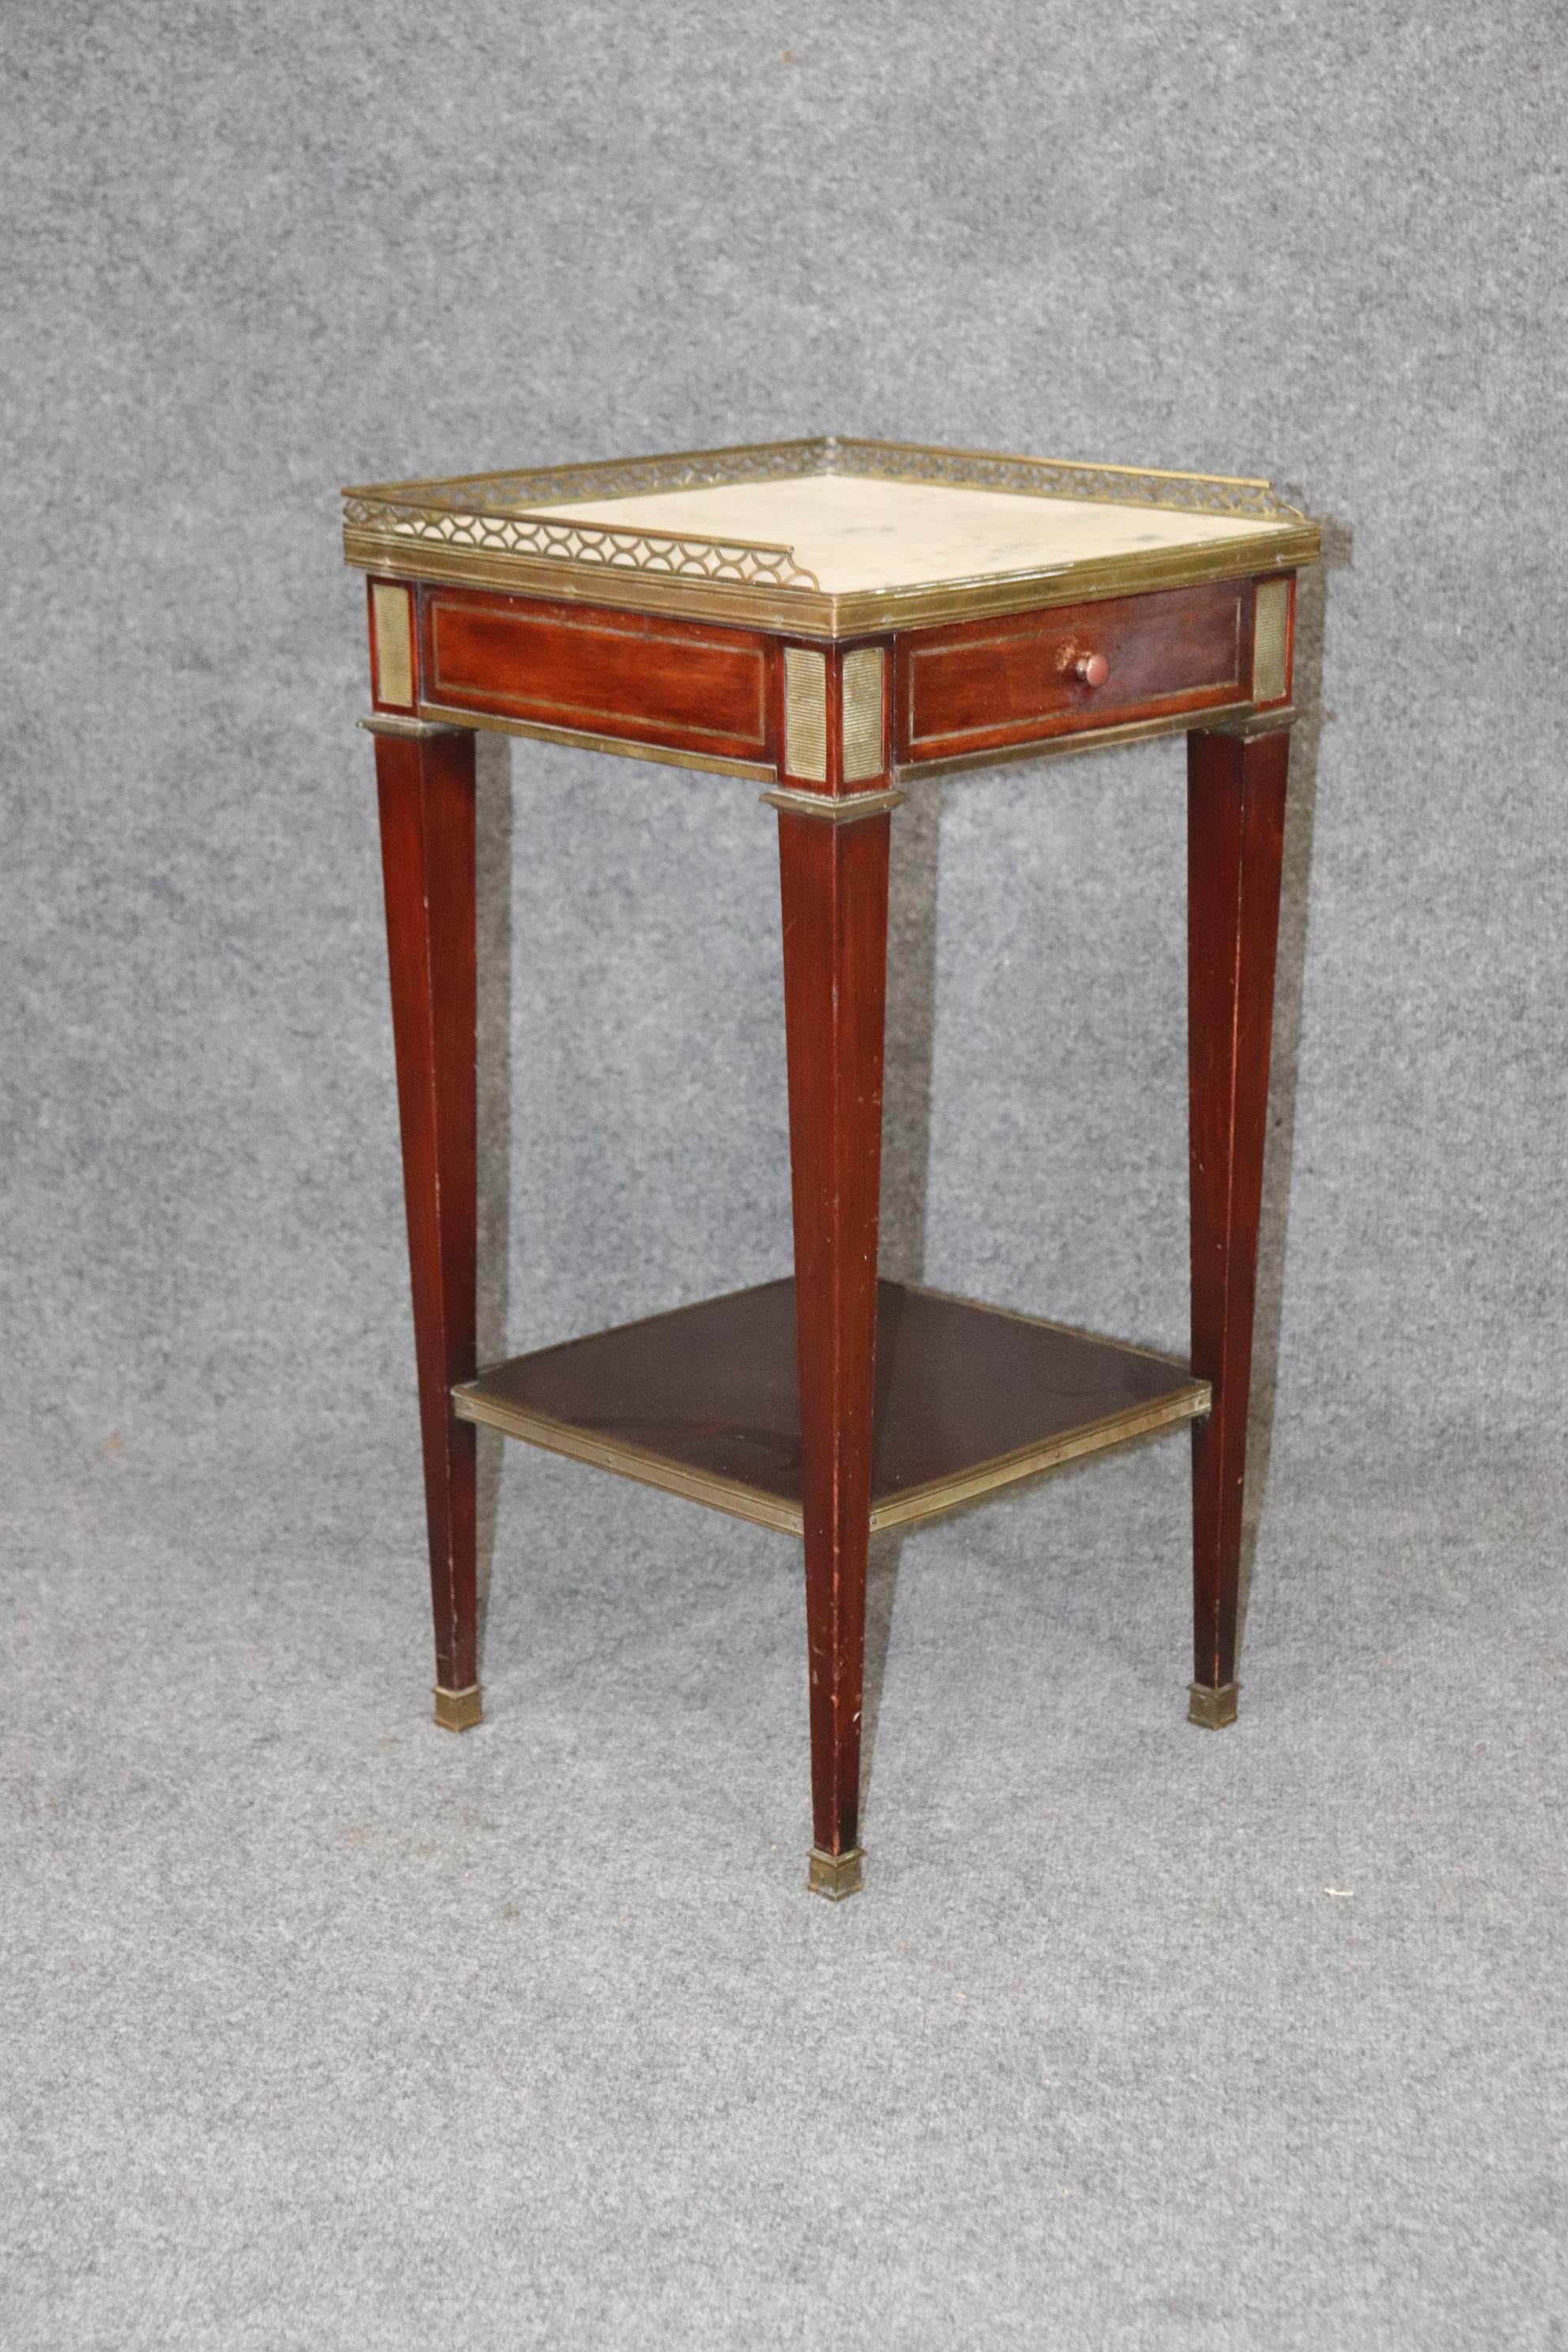 This Louis XVI Style French Marble Top Stand is made of the highest quality and is truly remarkable! Although small this little stand/end table packs a punch! and will most definitely be a conversation starter! This stand can be paired with just